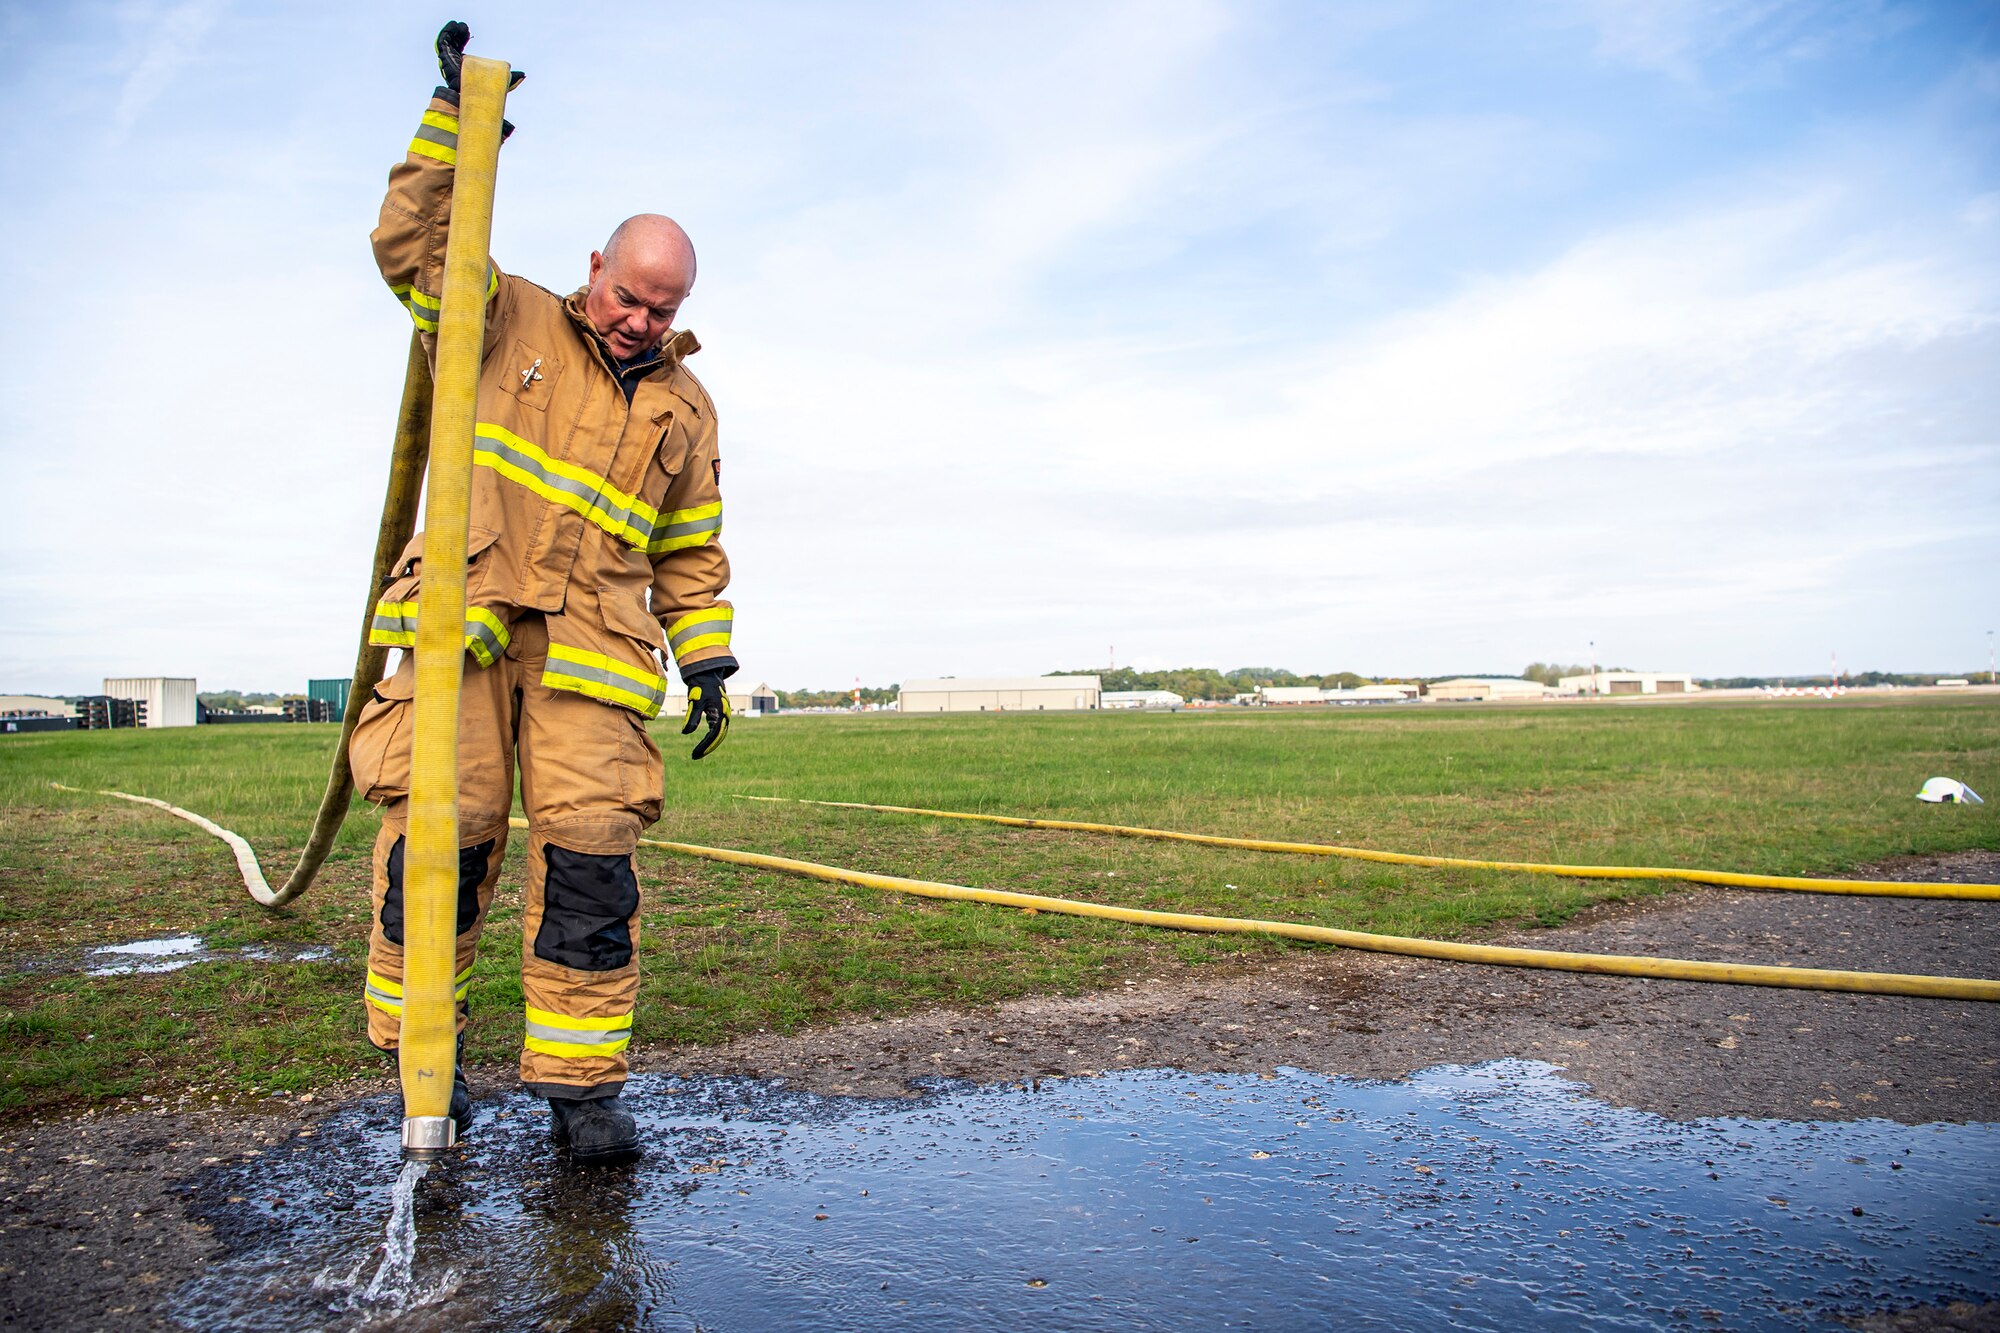 A firefighter from the 422d Fire Emergency Services empties a fire hose following a live-fire training exercise at RAF Fairford, England, Oct. 3, 2022. Firefighters from the 422d FES, are required to complete live-fire training bi-annualy to test thief overall readiness and ability to properly extinguish an aircraft fire. (U.S. Air Force photo by Staff Sgt. Eugene Oliver)